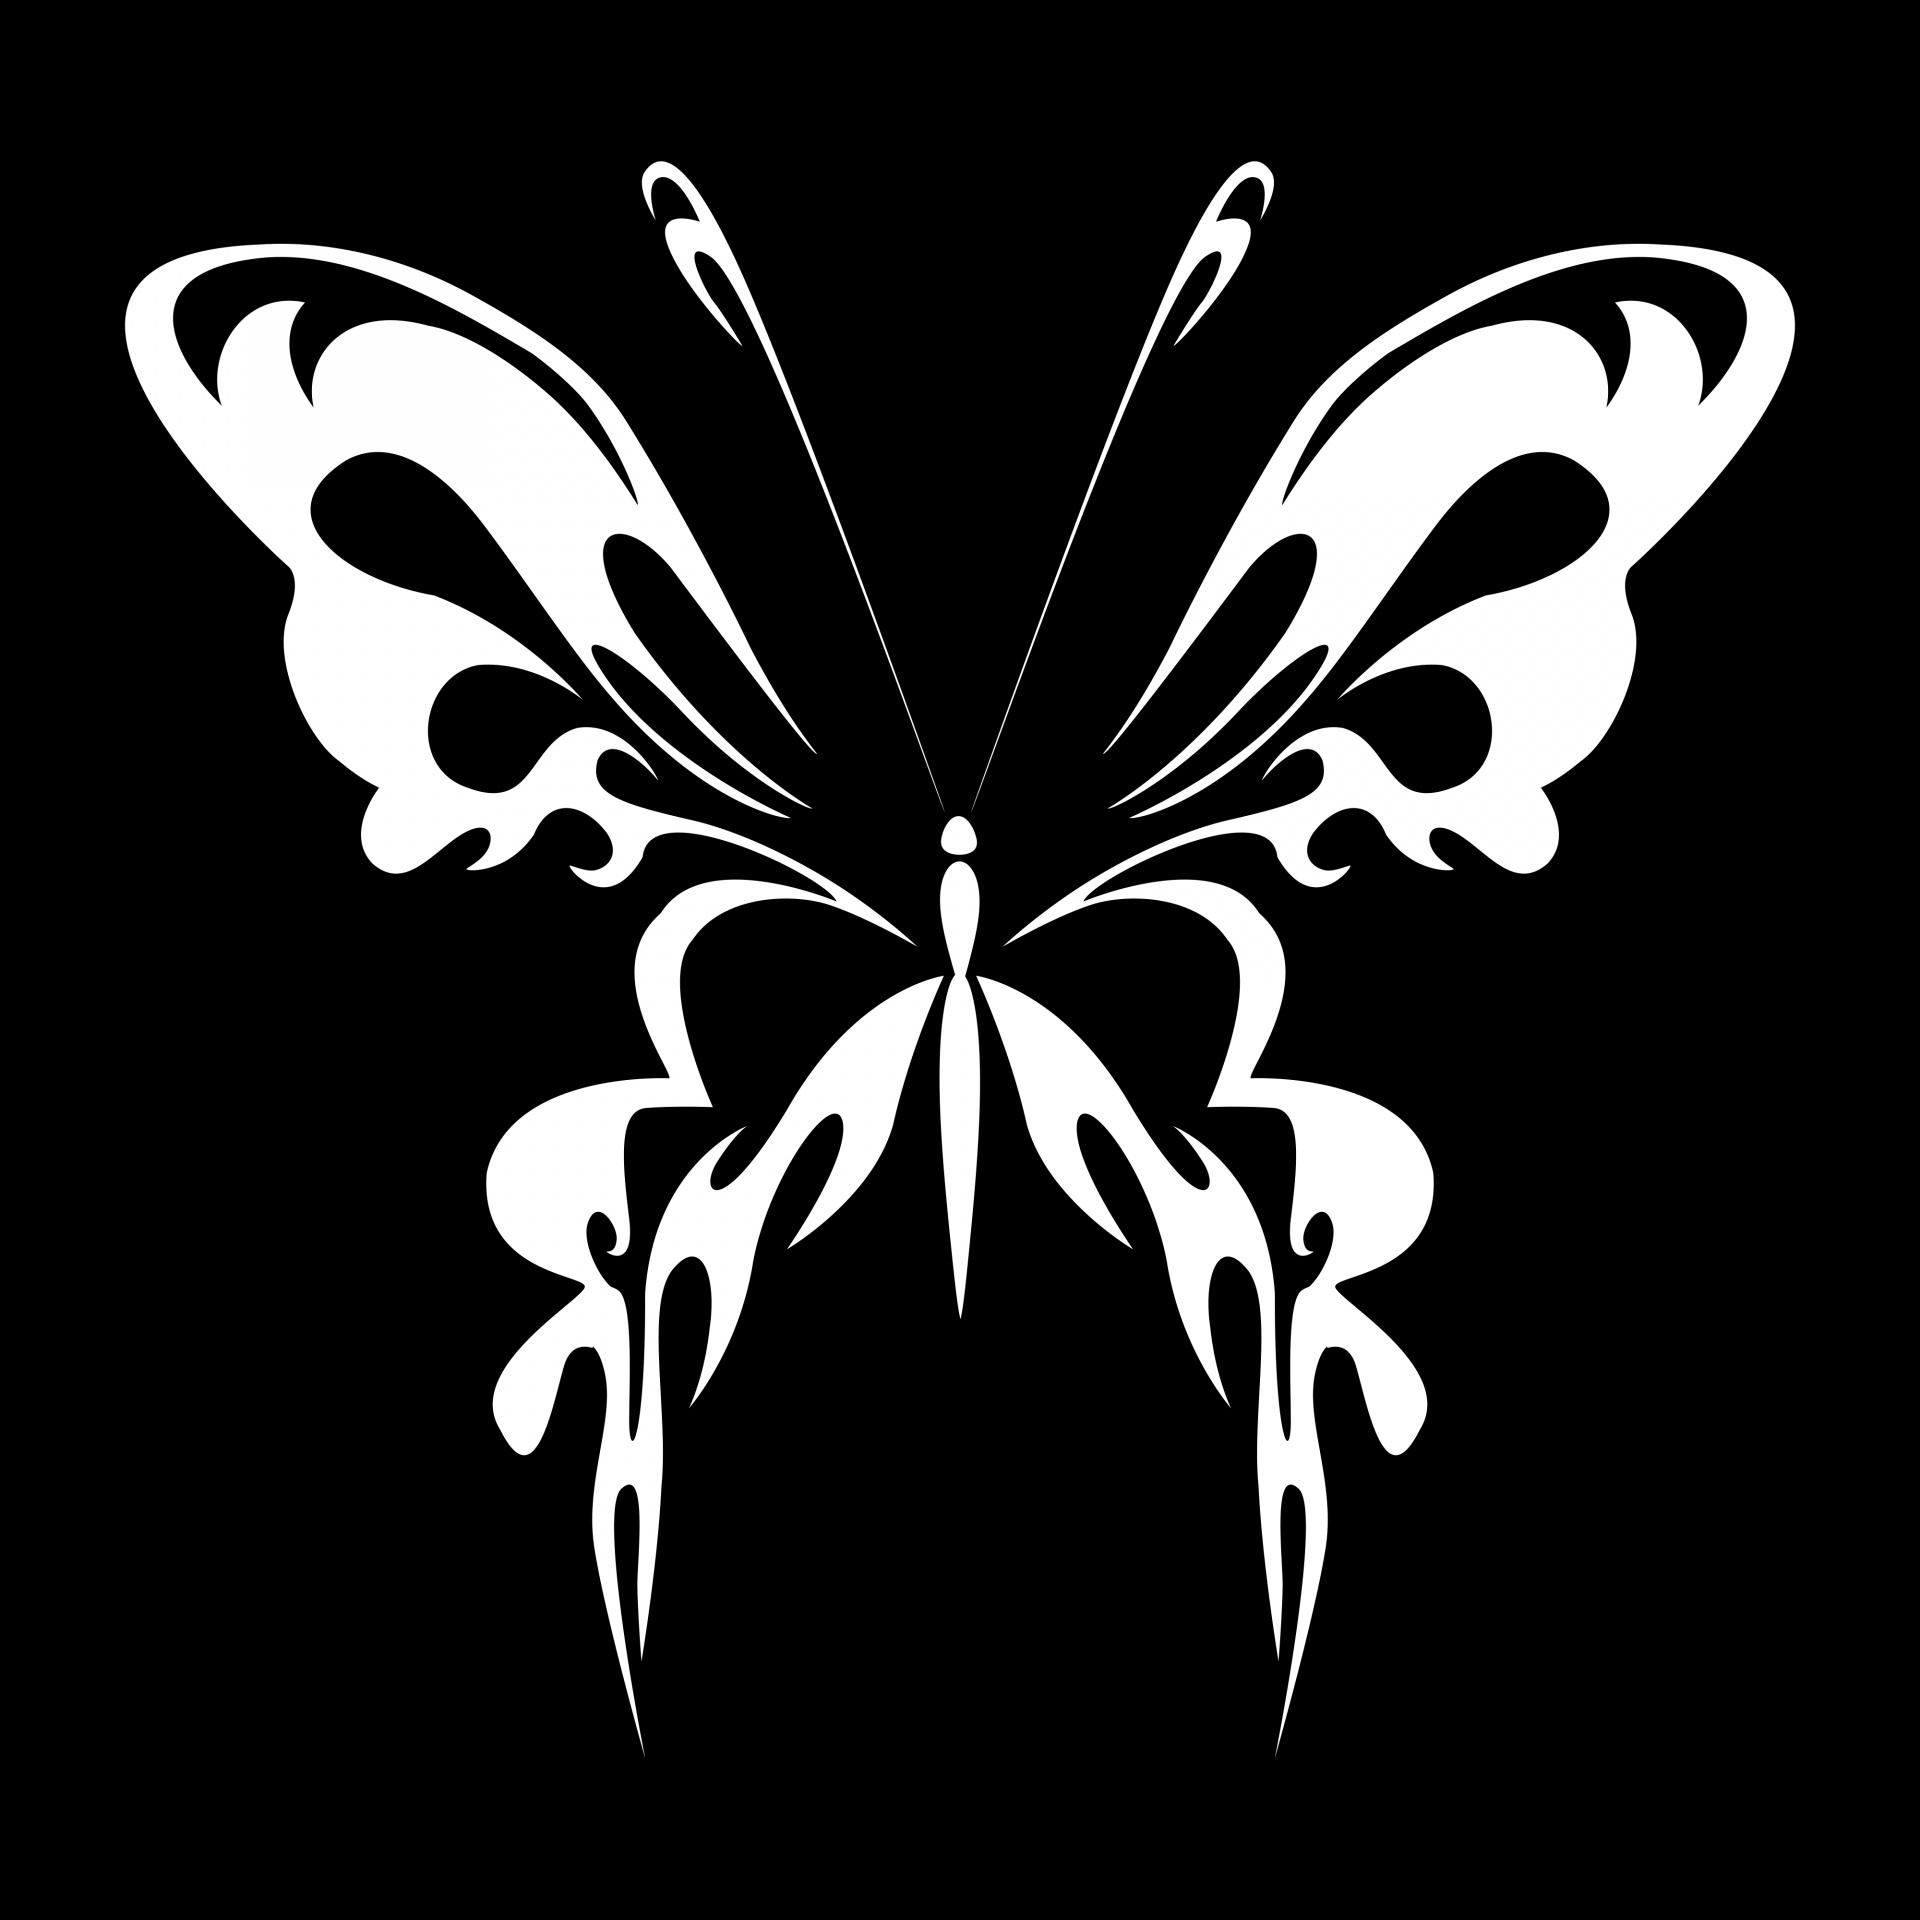 Drawing White Butterfly Black Background Free Image From Needpix Com